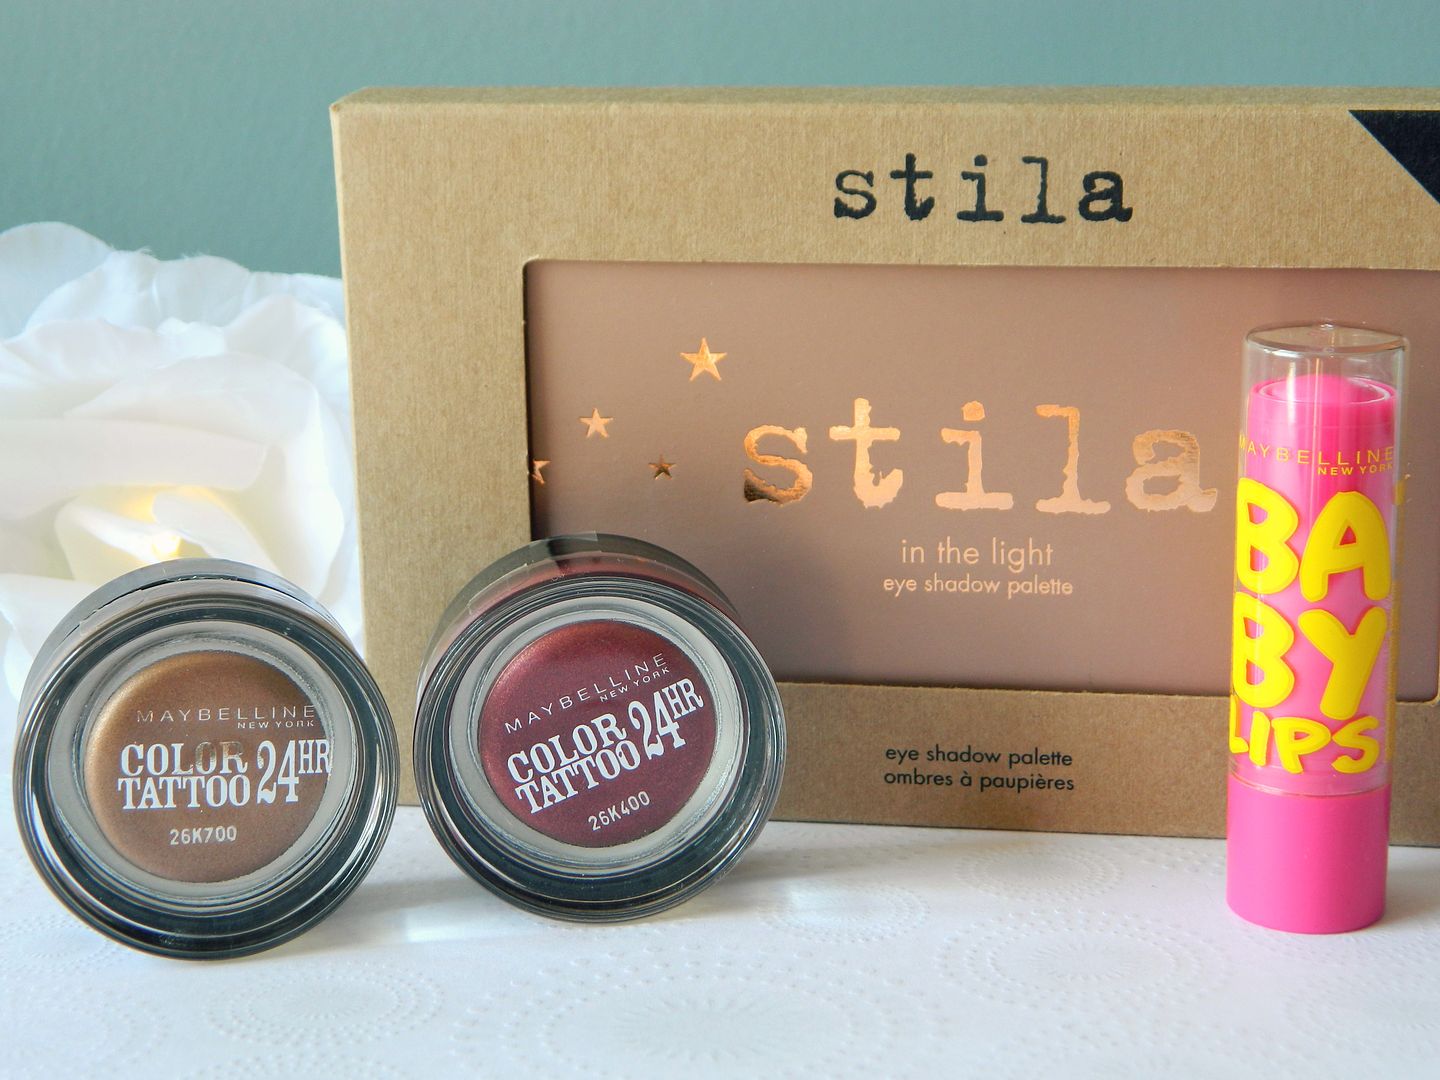 Birthday Haul Maybelline Color Tattoos Baby Lips Stila In The Light Palette Belle-amie UK Beauty Fashion Lifestyle Blog